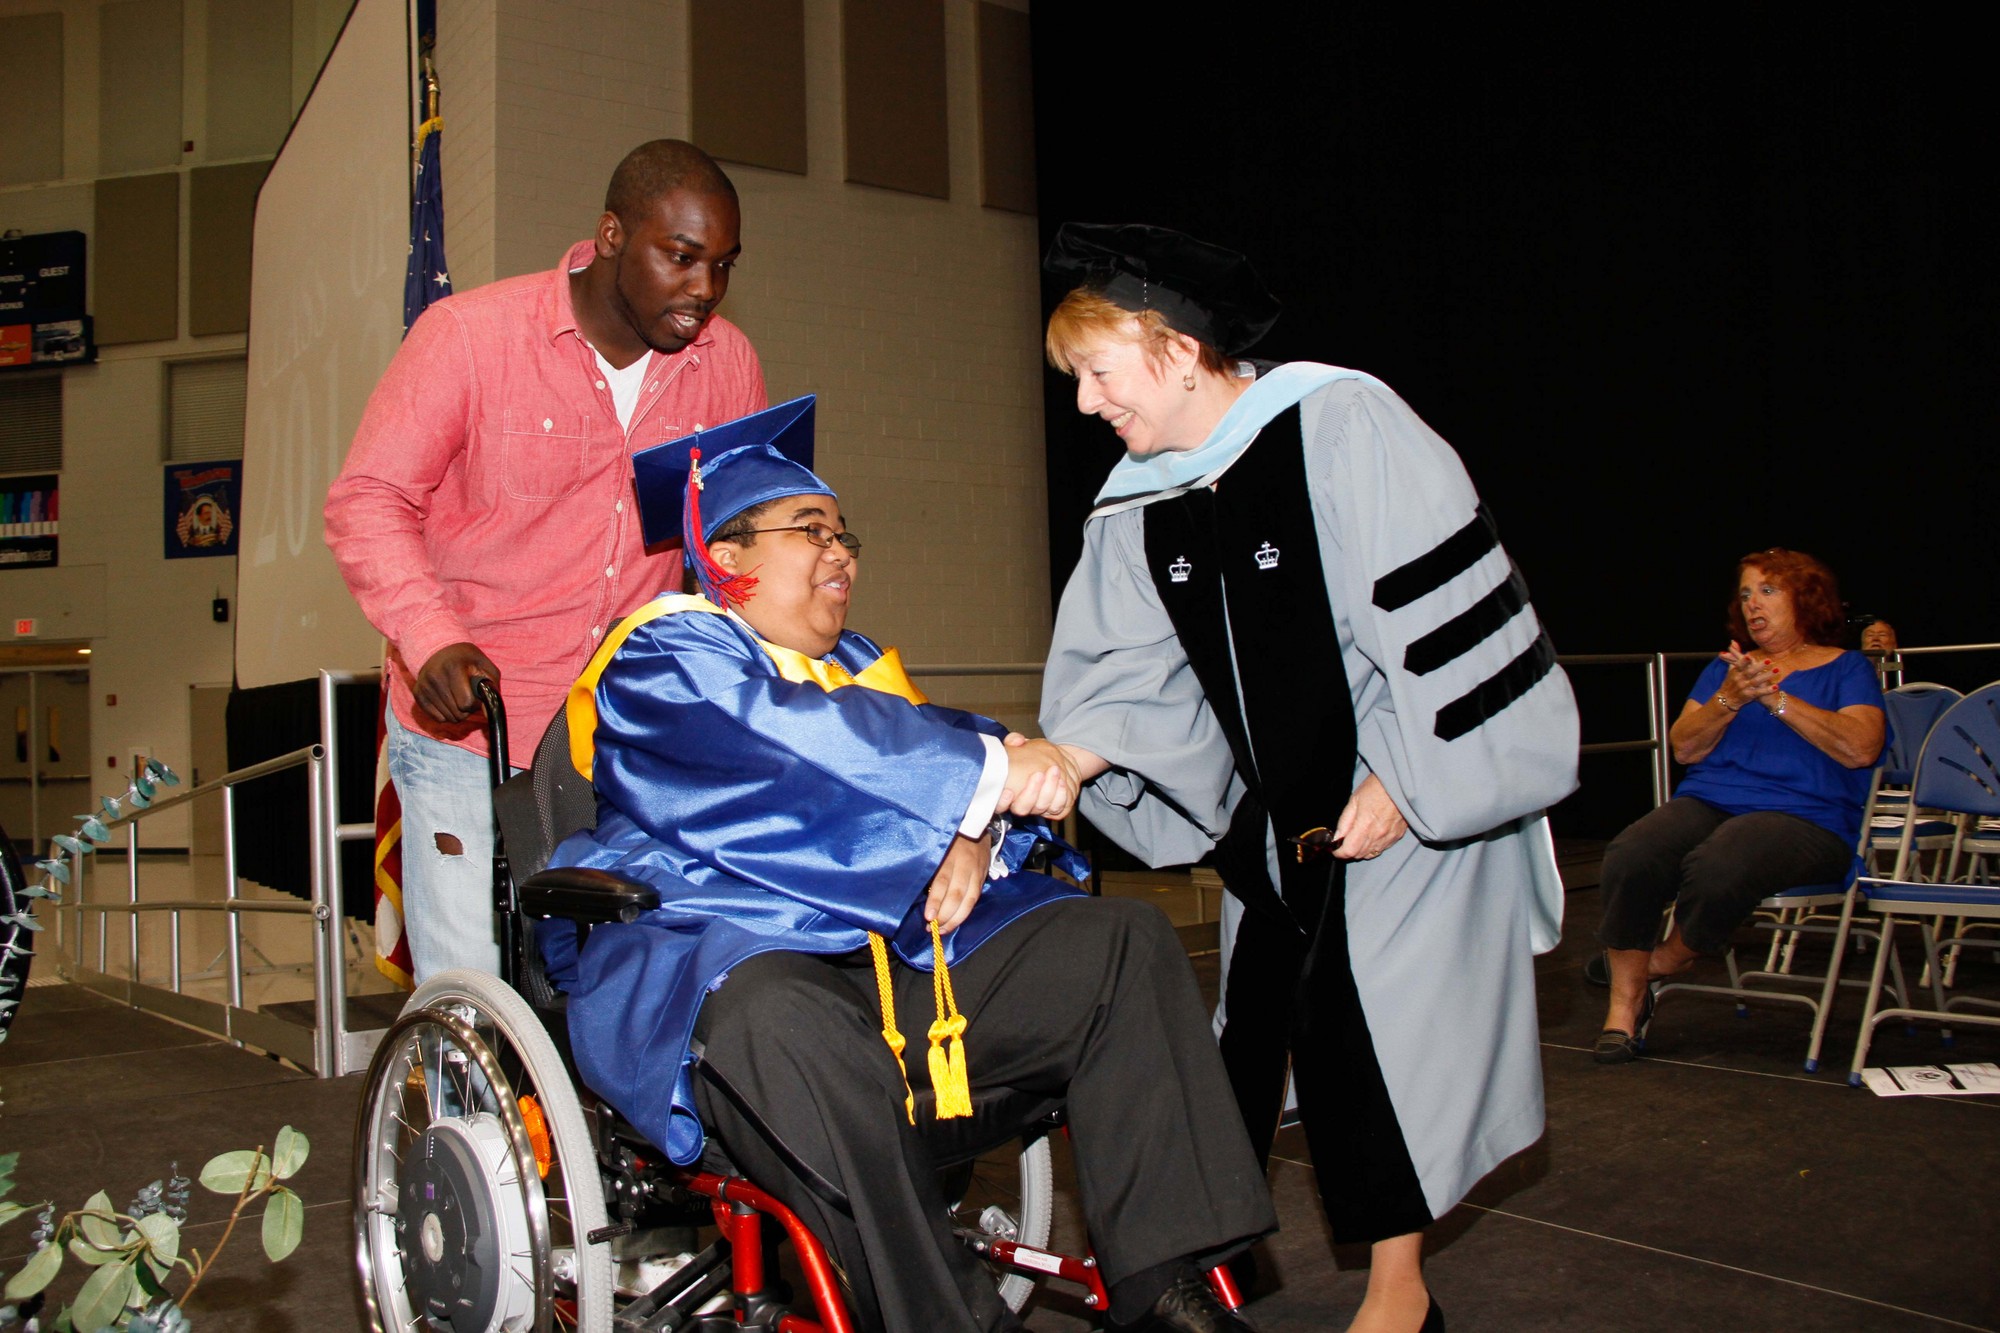 was awarded his diploma by South Side Principal Dr. Carol Burris.